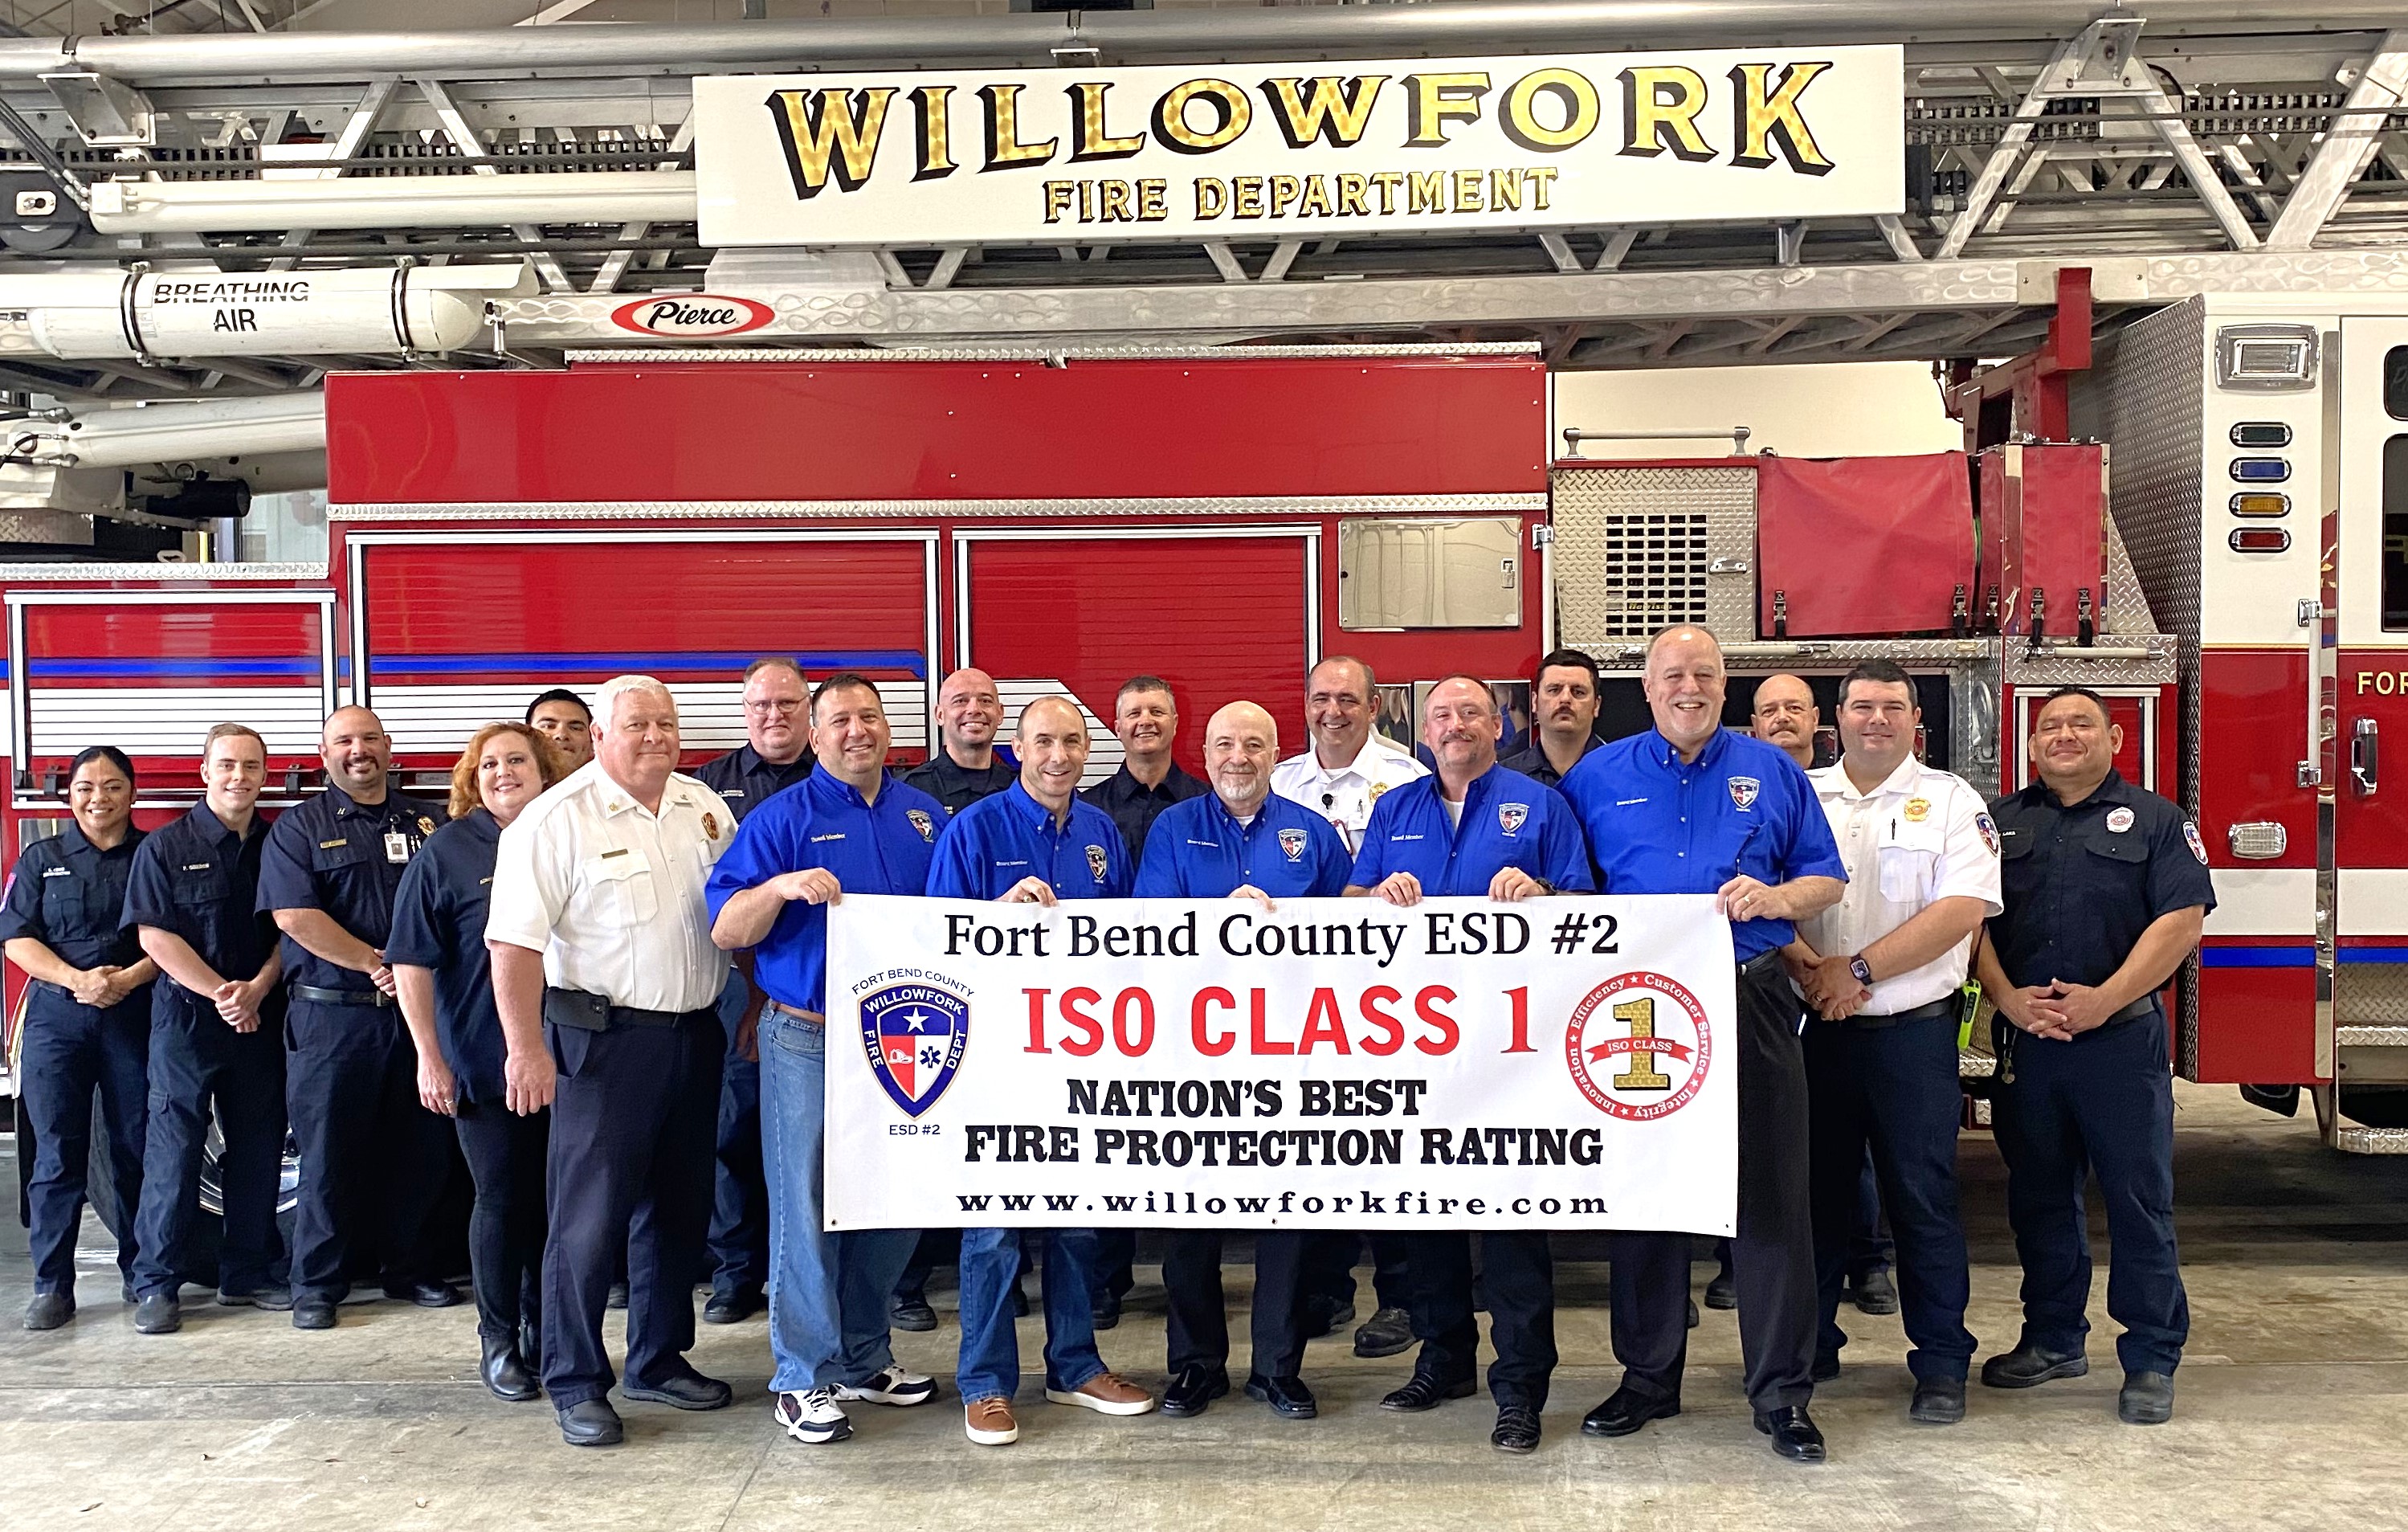 Willowfork Fire Department and Fort Bend County ESD No. 2 Achieve Elite ISO Class 1 Fire Rating